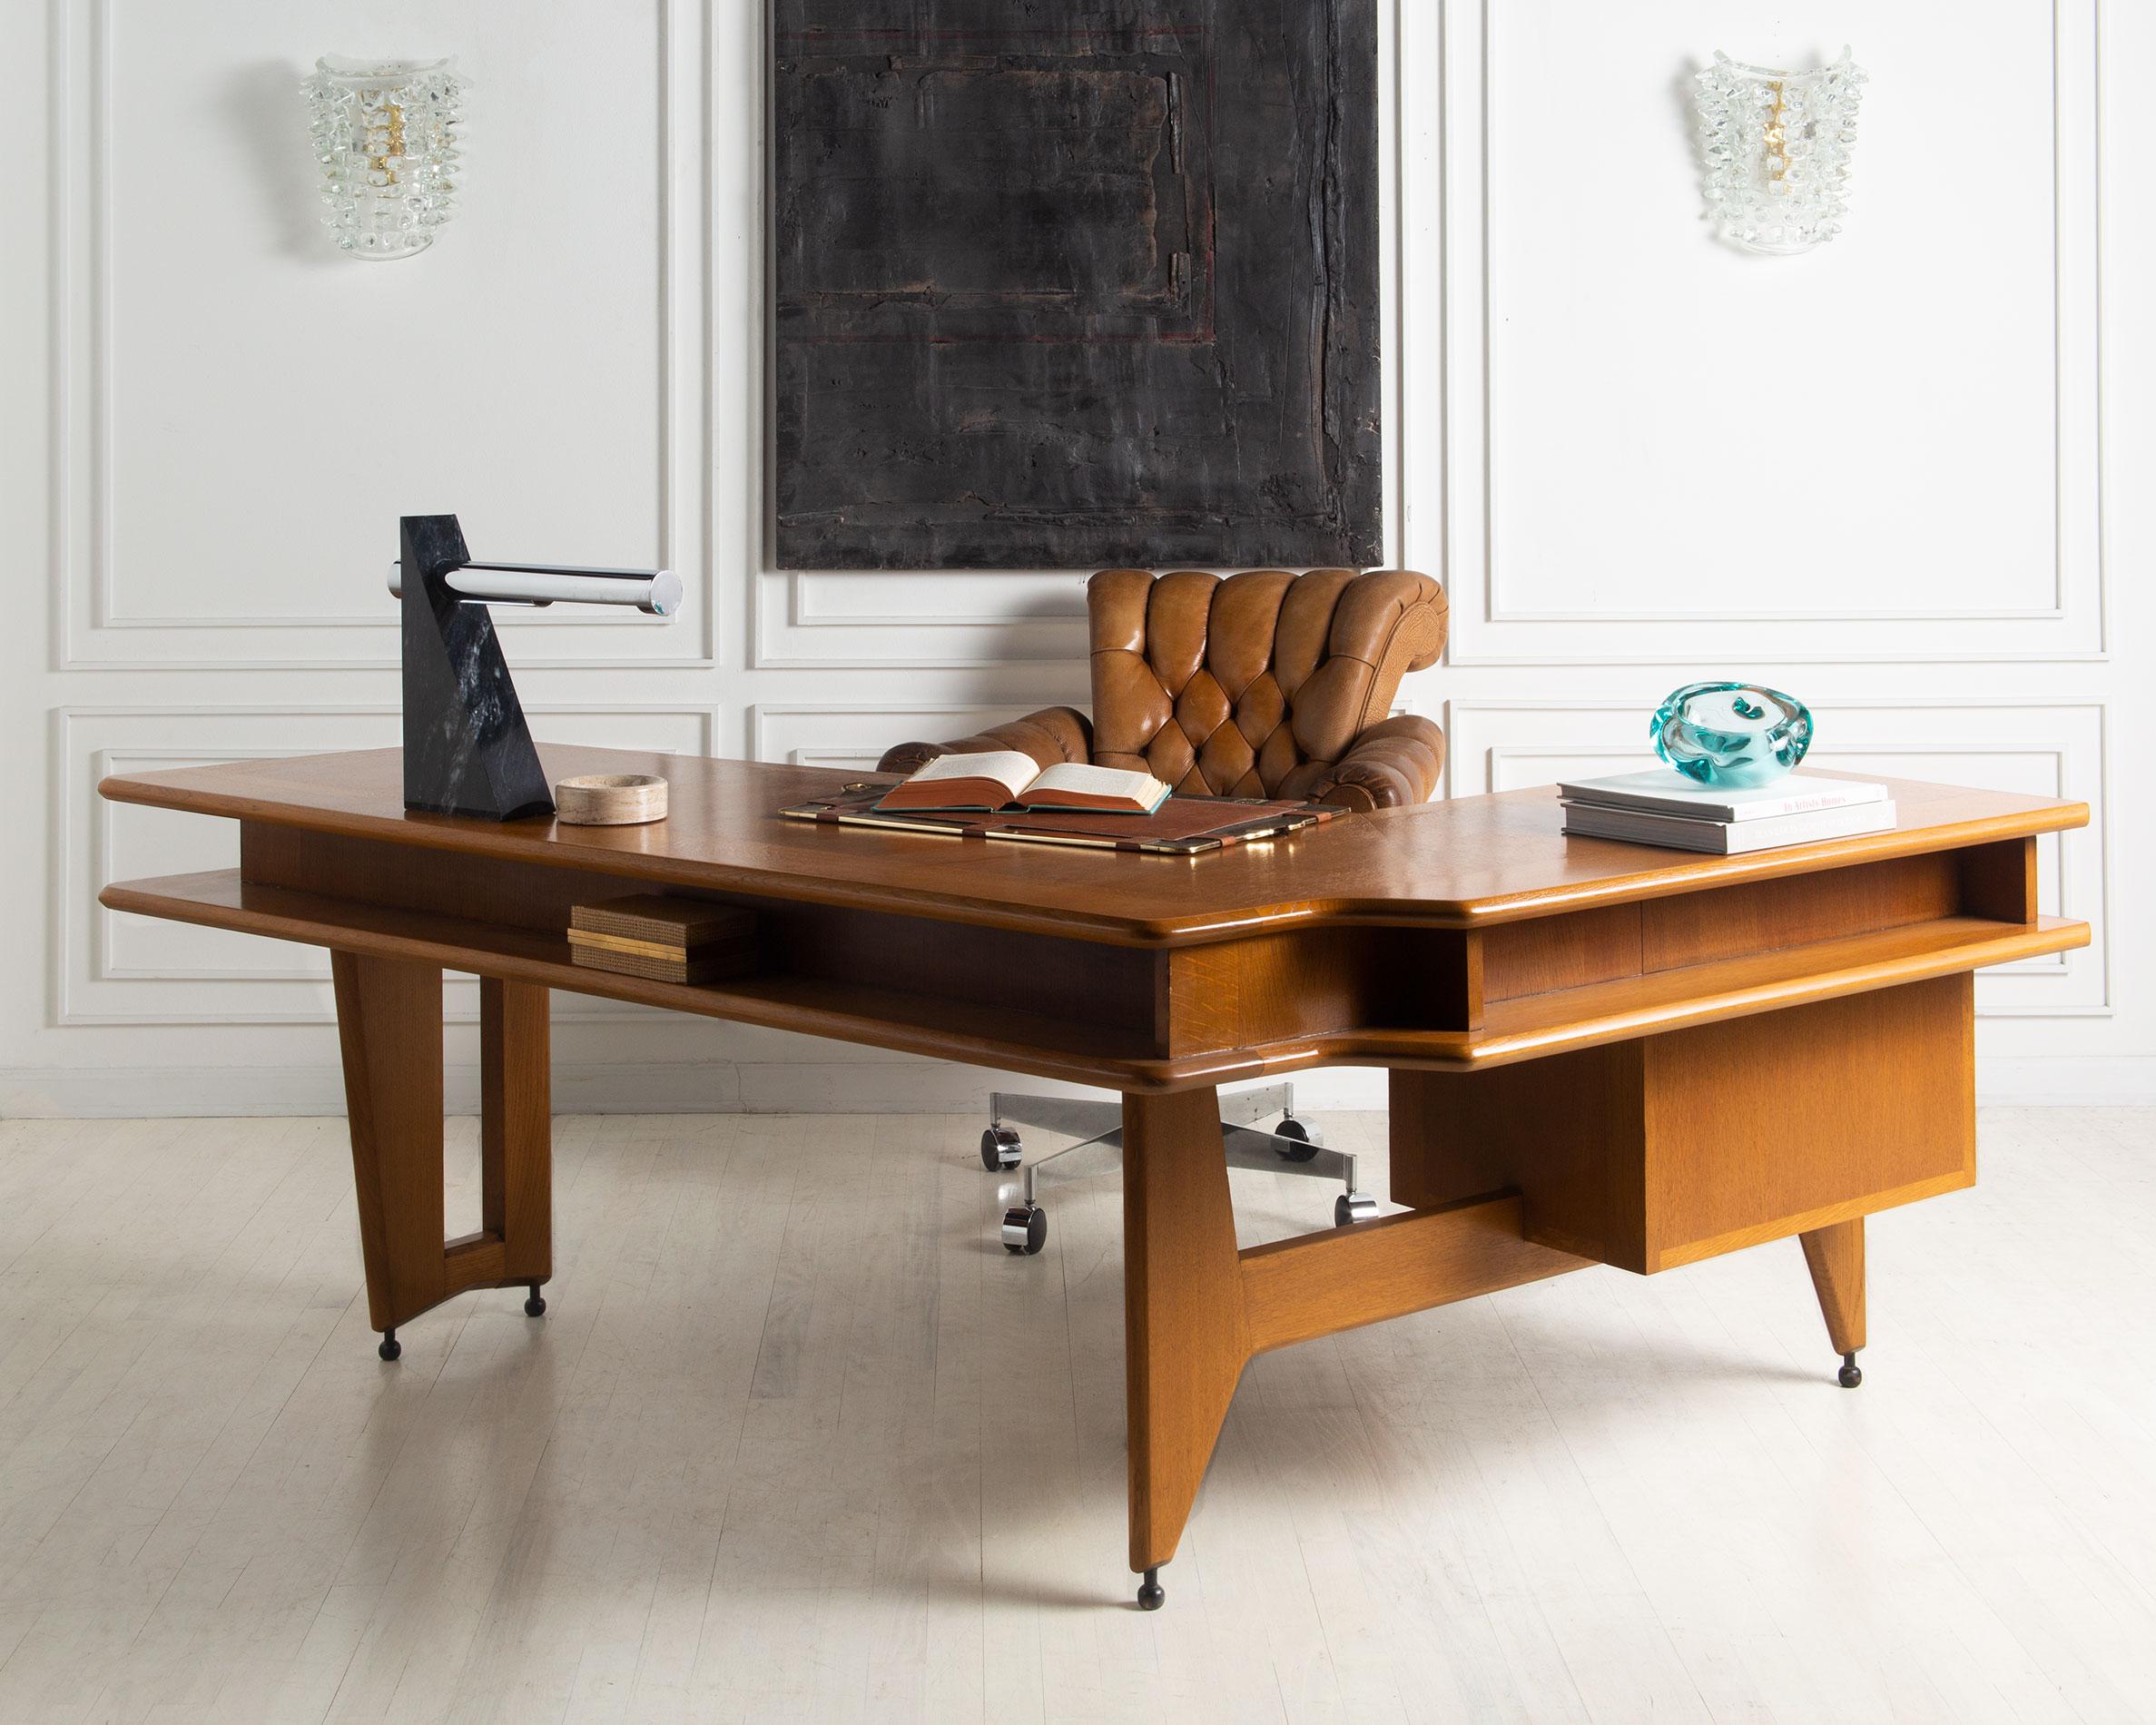 A rare desk by French design icons Guillerme and Chambron. Crafted of fine oakwood and featuring a custom ceramic pulls.

The desk has three drawers on the left hand side and a decorative shelf on the perimeter. This is a wonderful piece to have